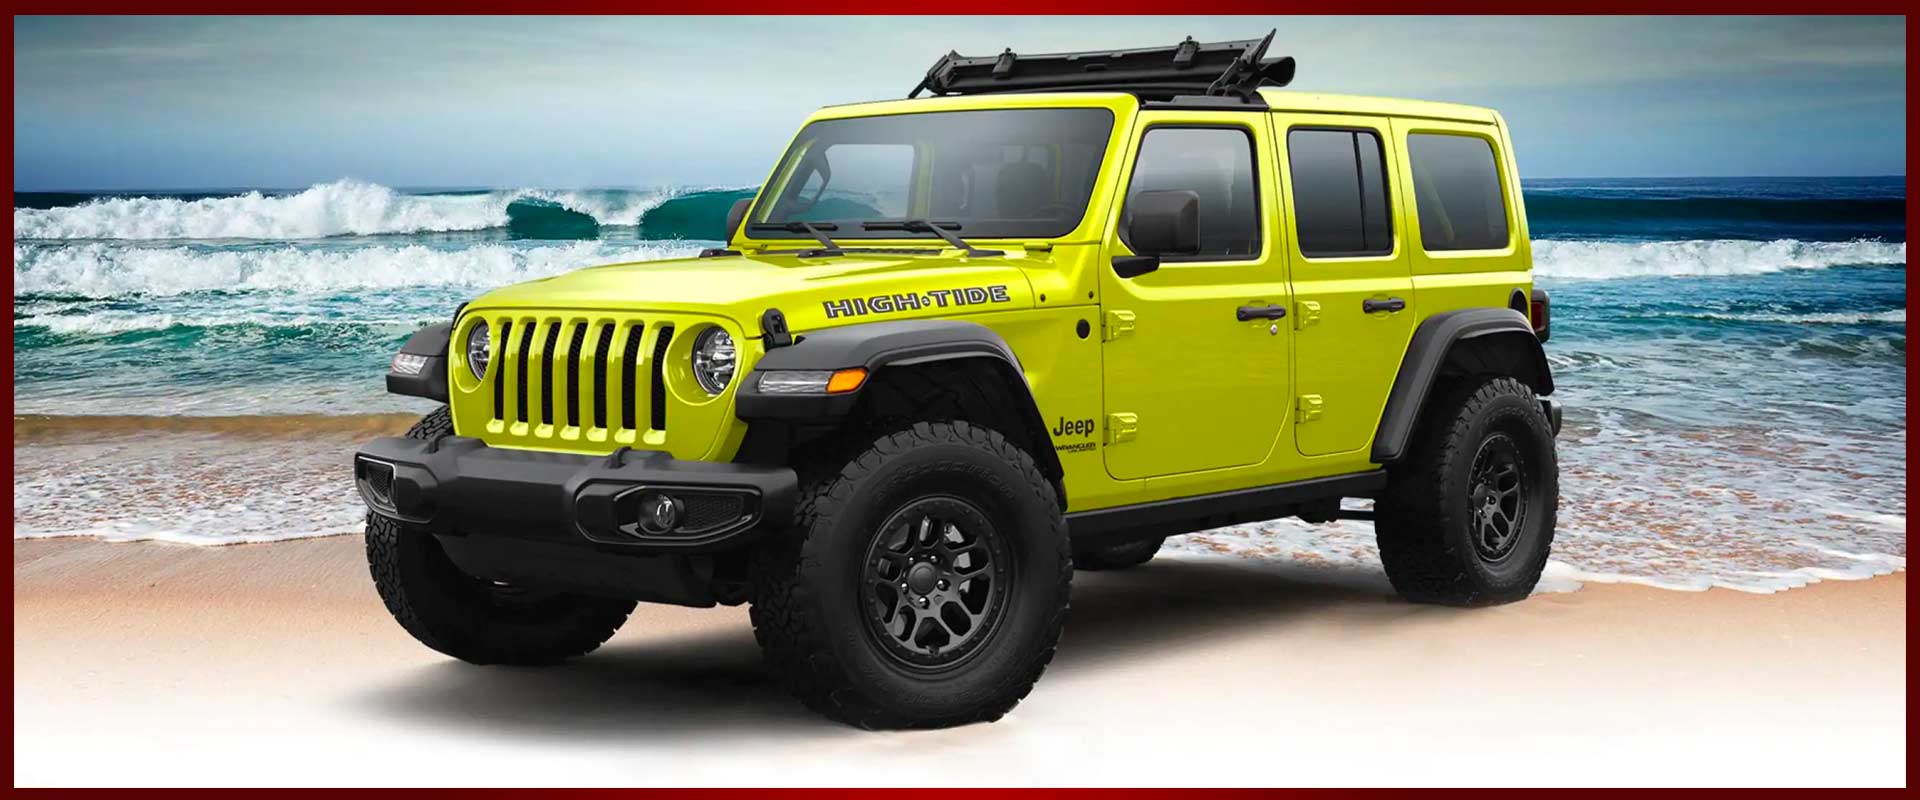 Limited-Release Beach Jeeps